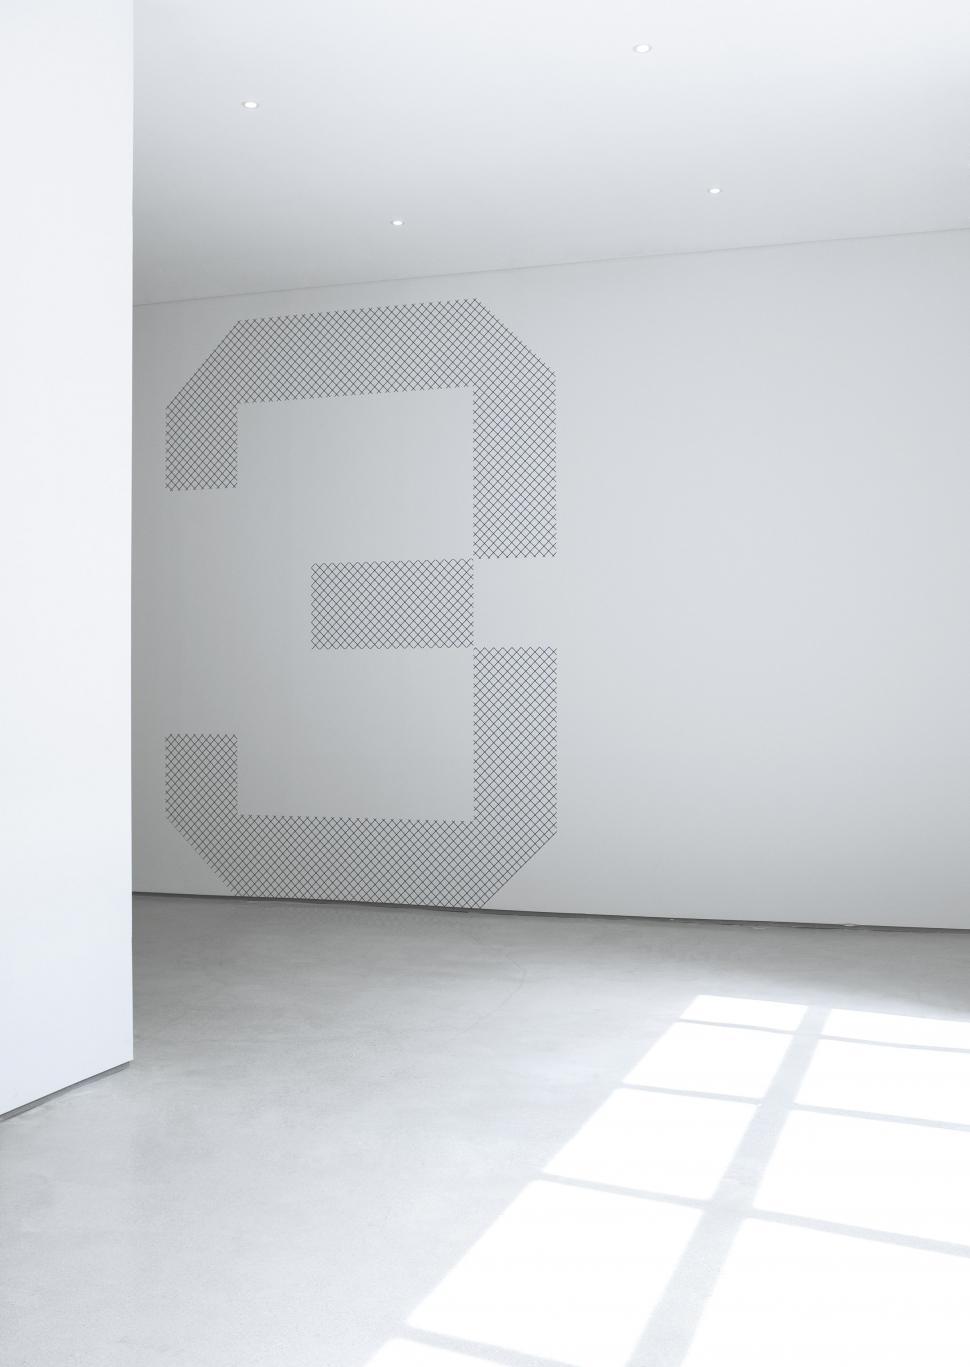 Free Image of White Room With Large Number on Wall 